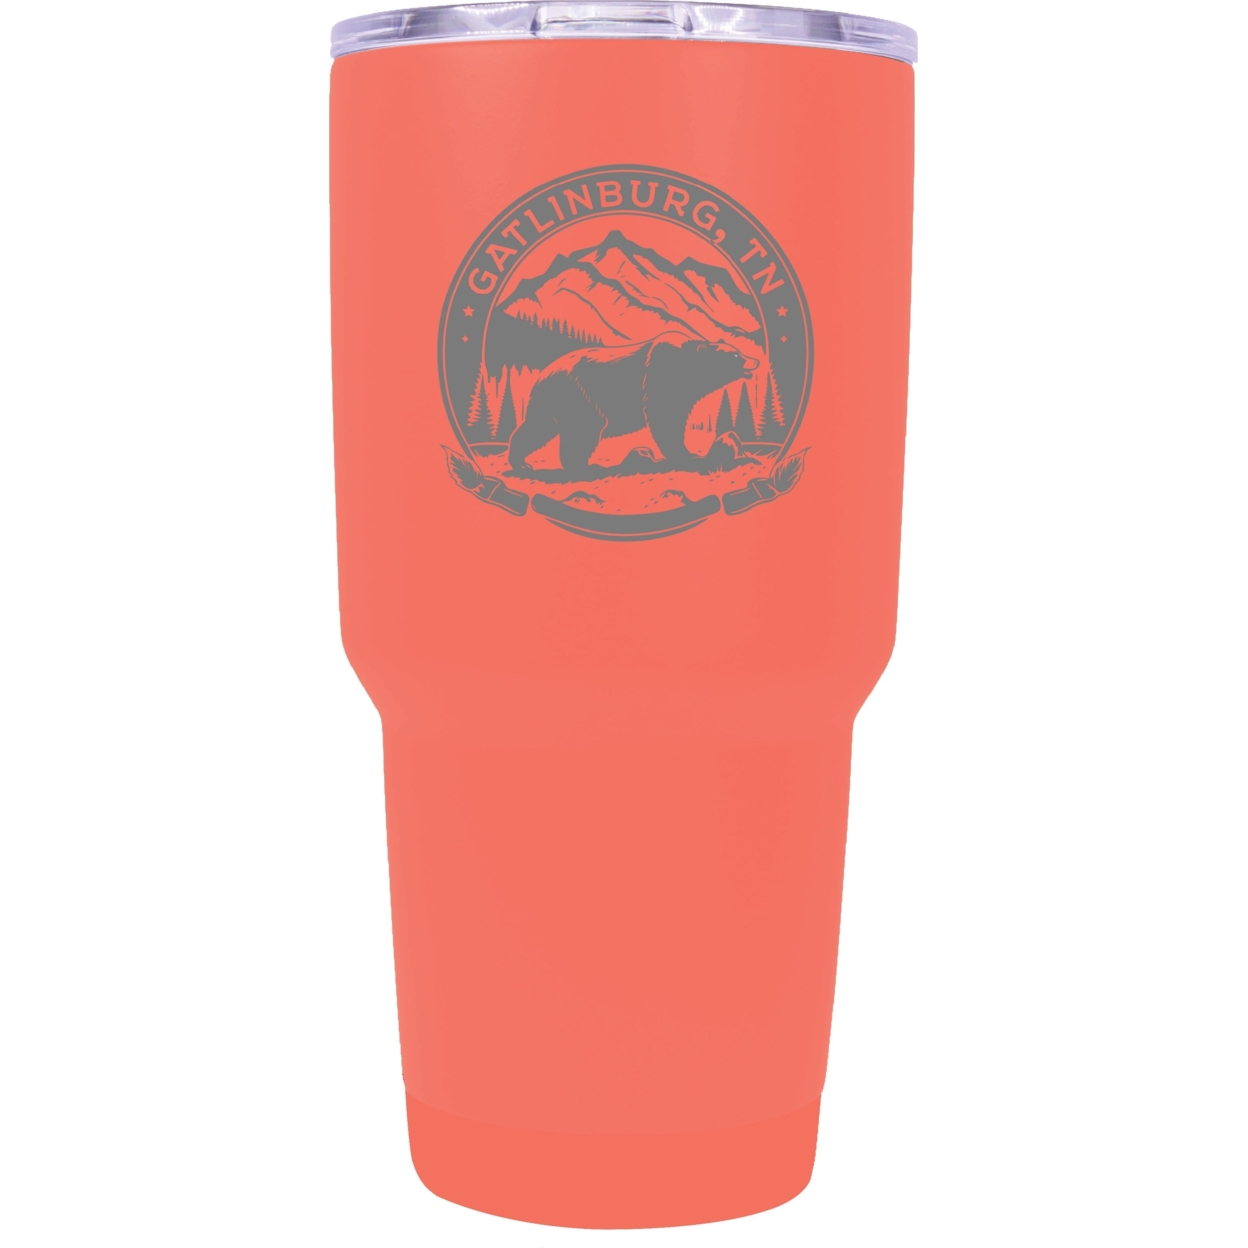 Gatlinburg Tennessee Laser Etched Souvenir 24 Oz Insulated Stainless Steel Tumbler - Coral